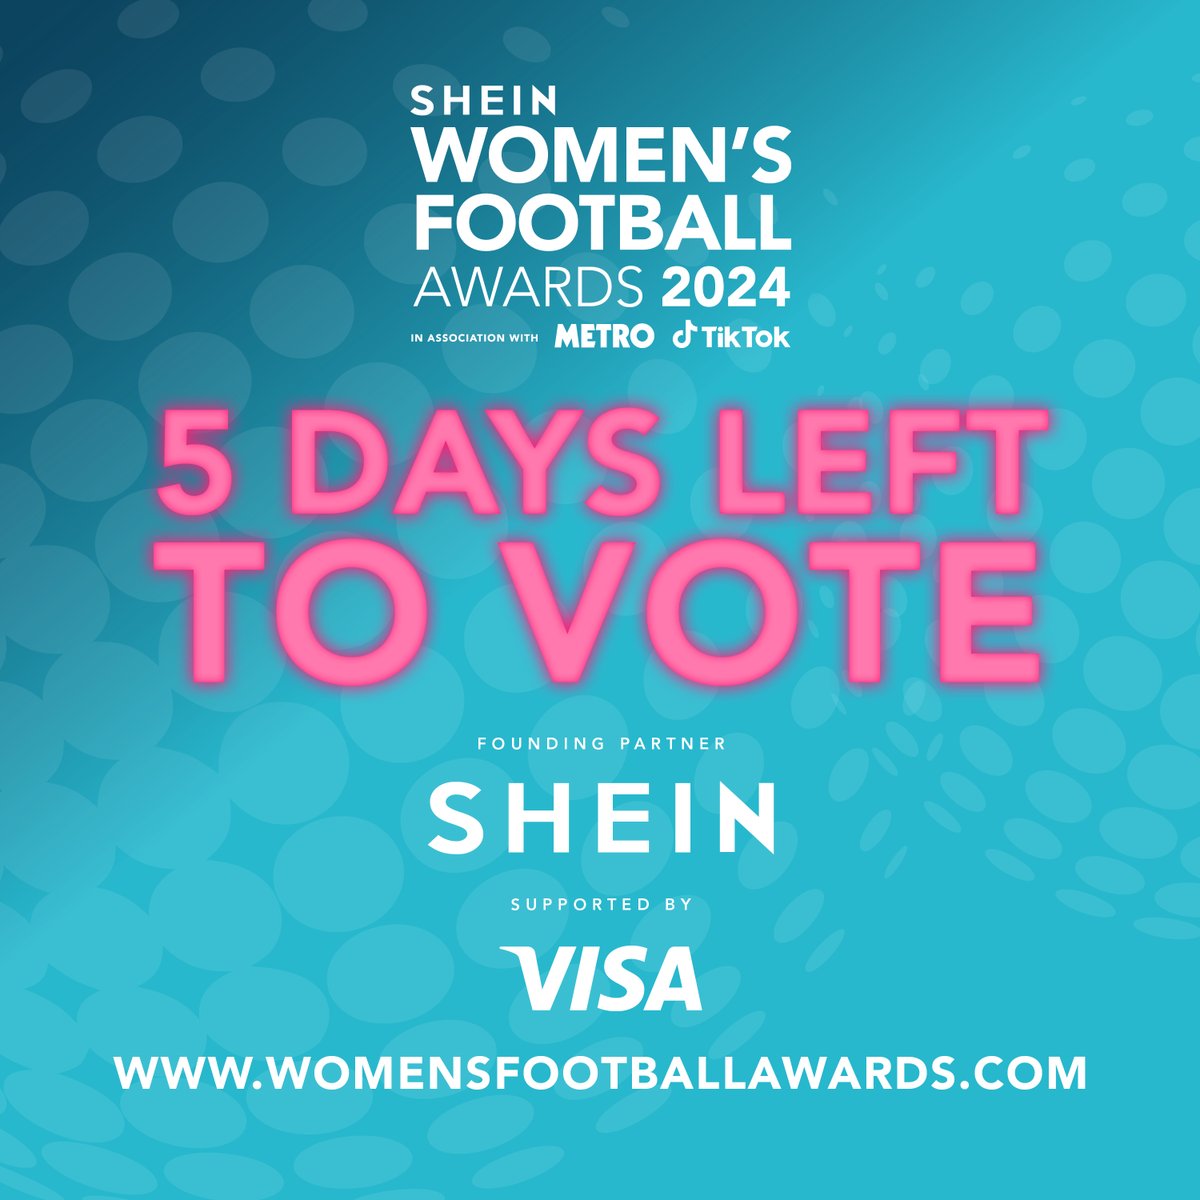 Only 5 days left to cast your votes for the 2024 Women's Football Awards! 🏆⚽️ Don't miss your chance to support your favourite players, teams, brands and women's football heroes. Head to womensfootballawards.com to vote now! #WFA24 #VoteNow